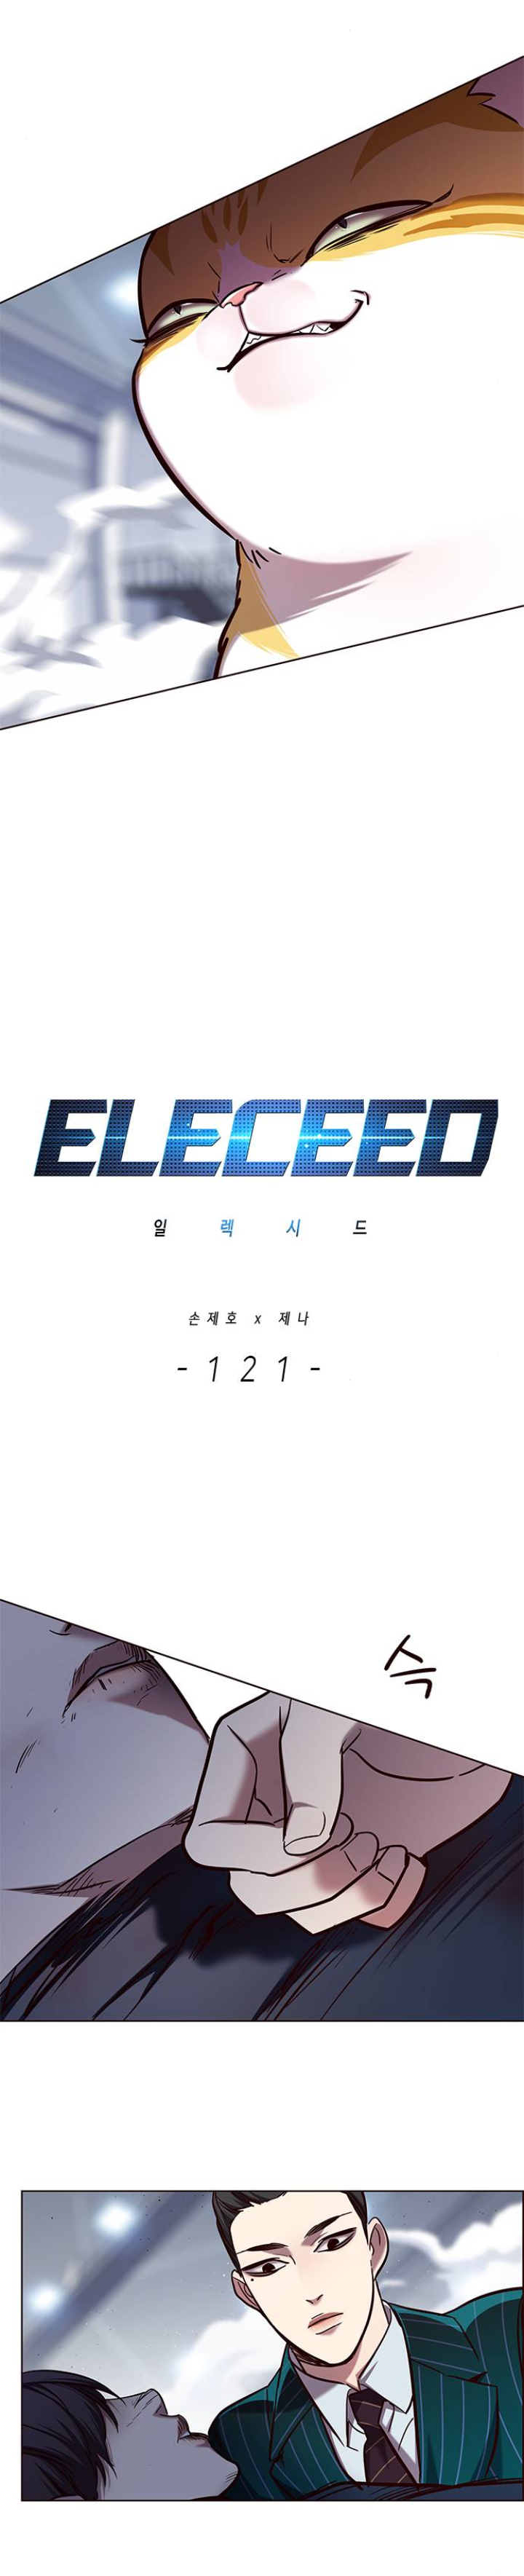 Eleceed - Page 3